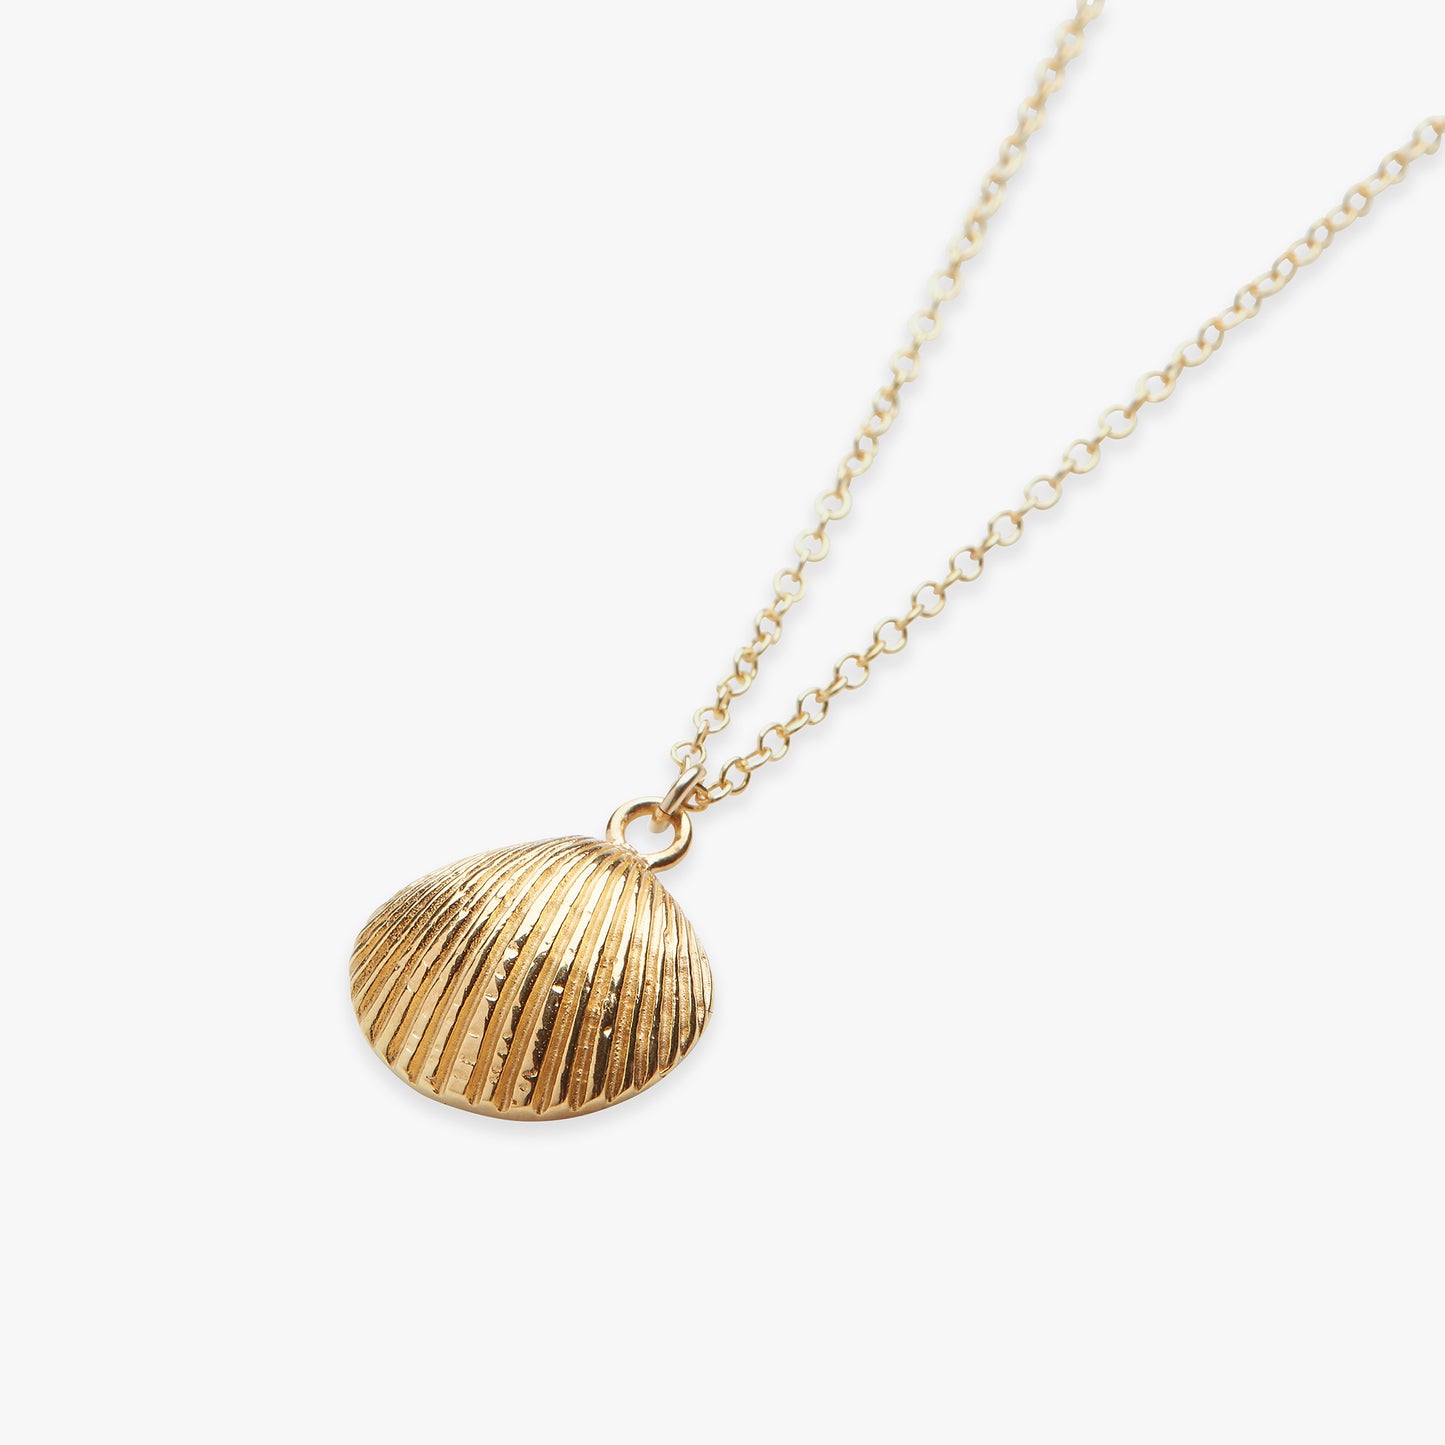 Cockle Shell ketting gold filled